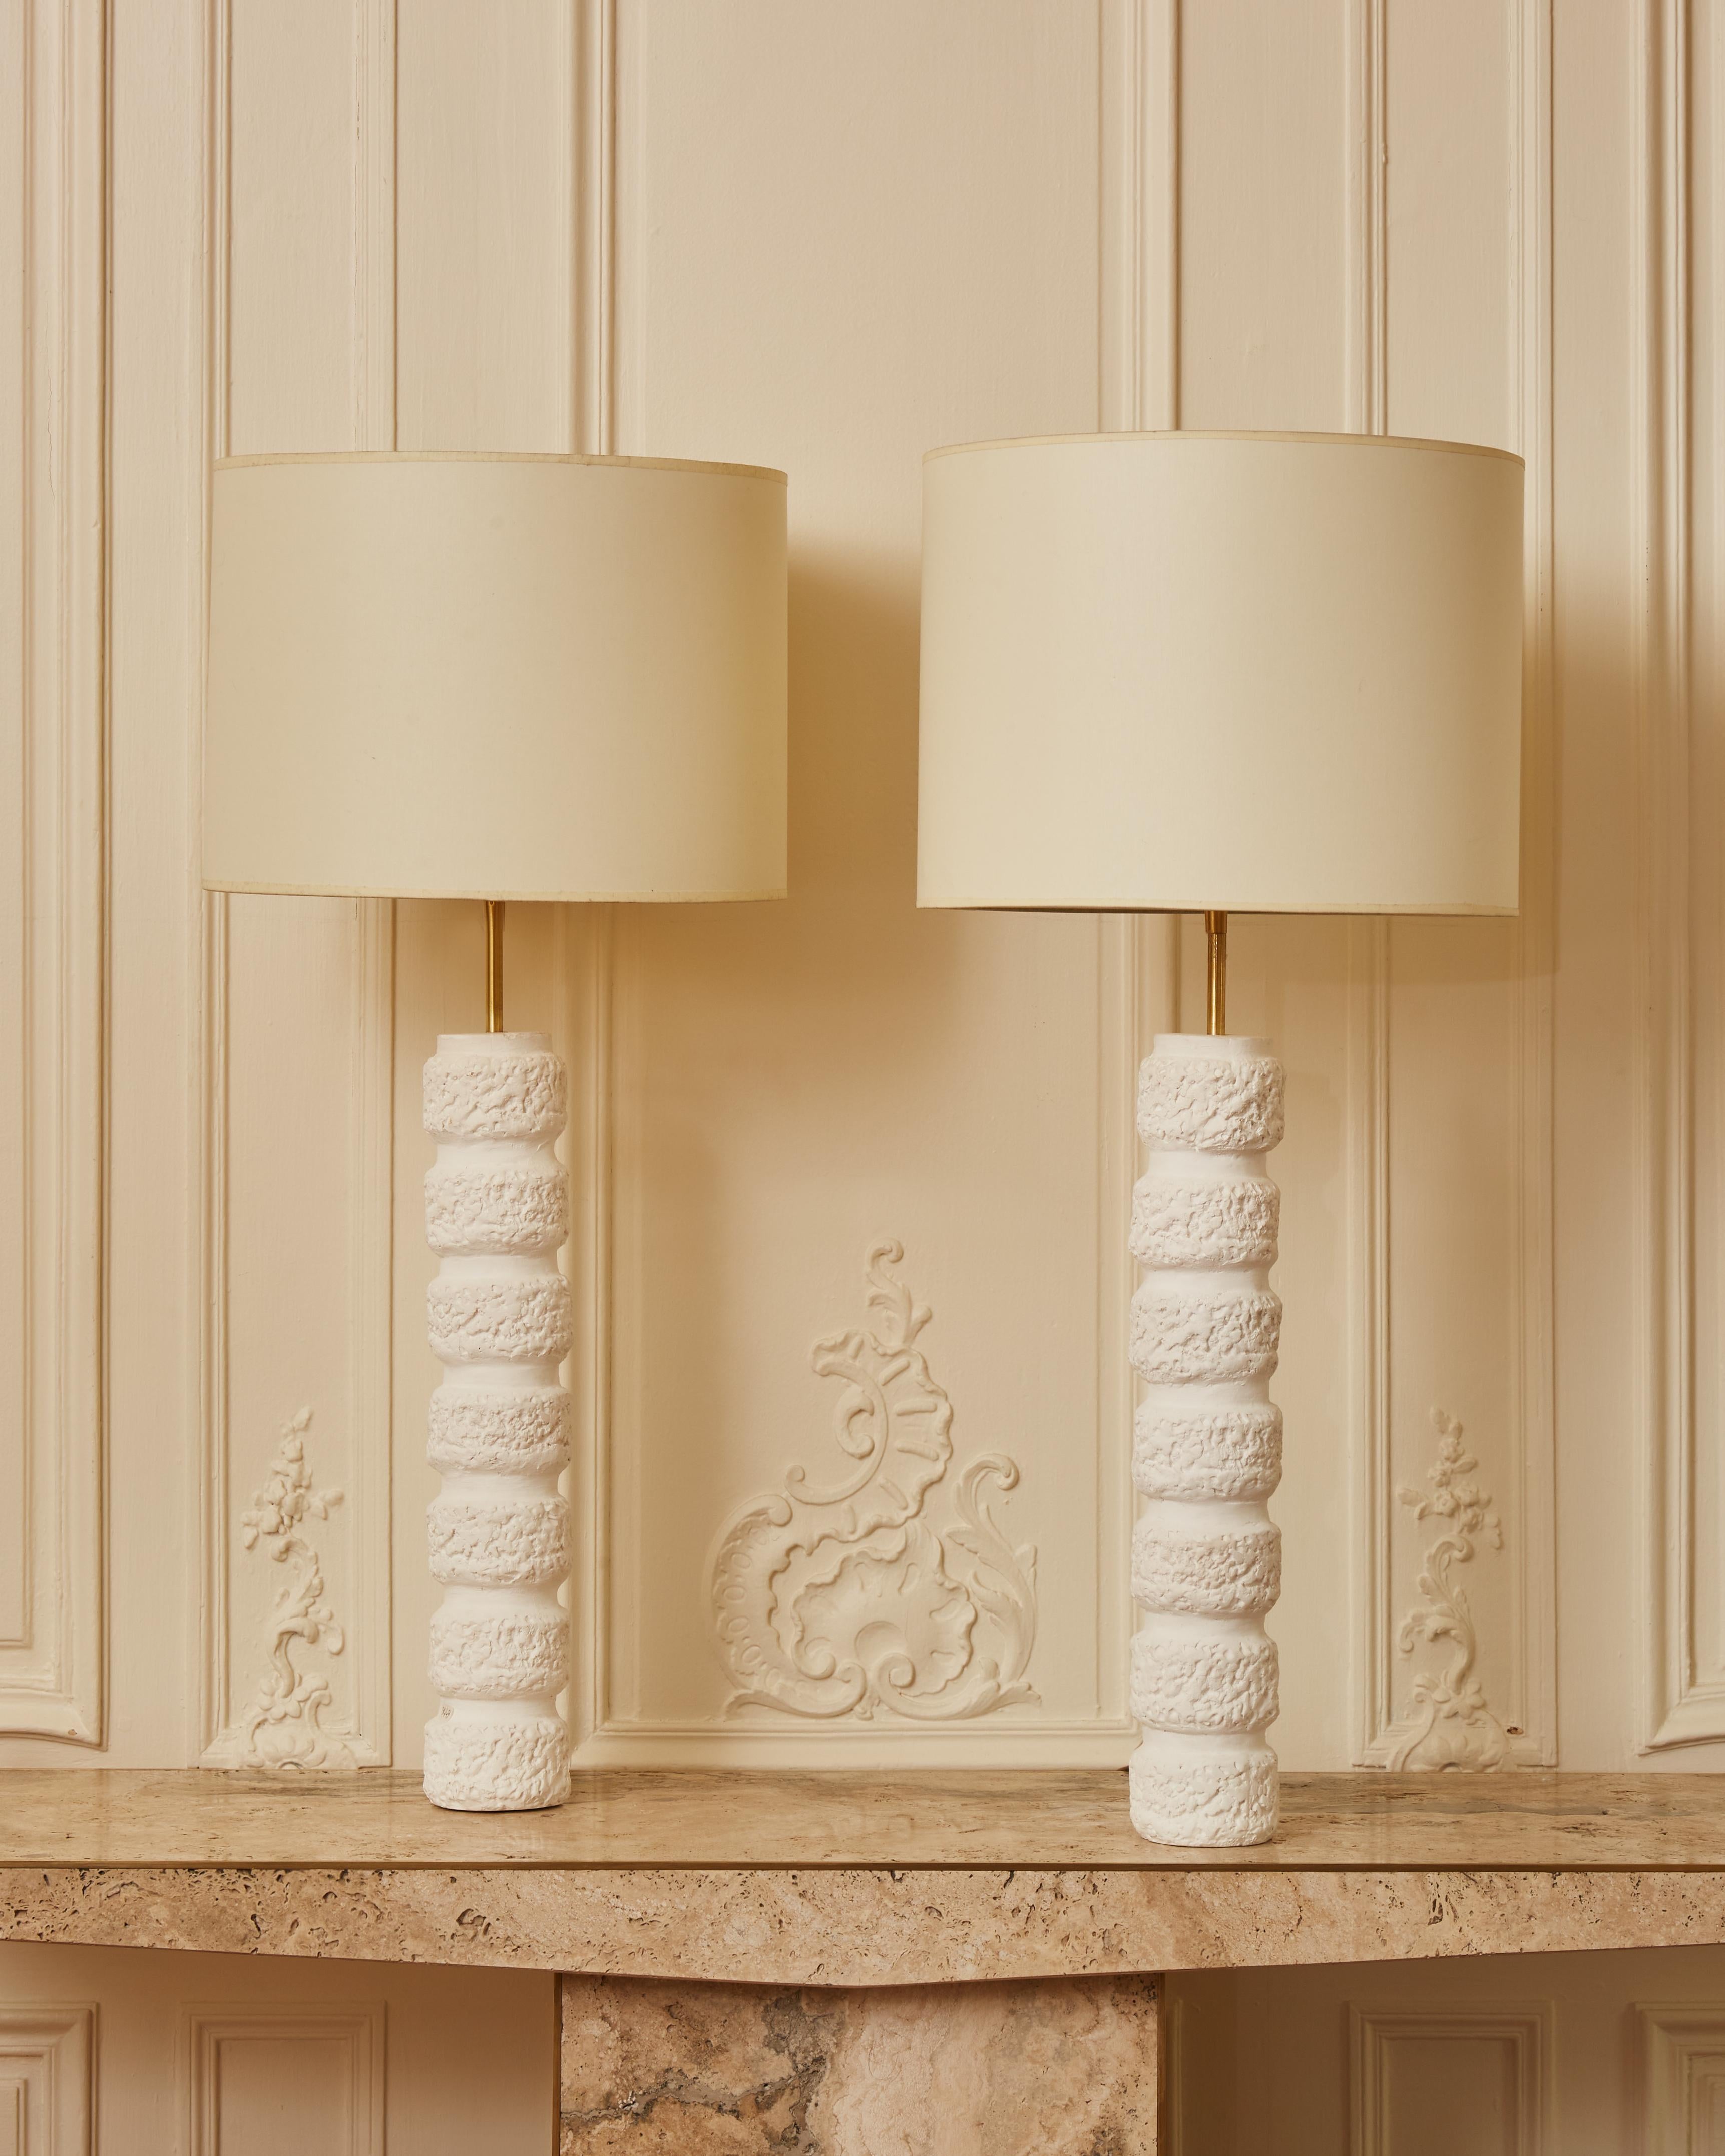 Pair of elegant table lamps in sculpted plaster.
Signed by the french artist Lynx. 
2022.